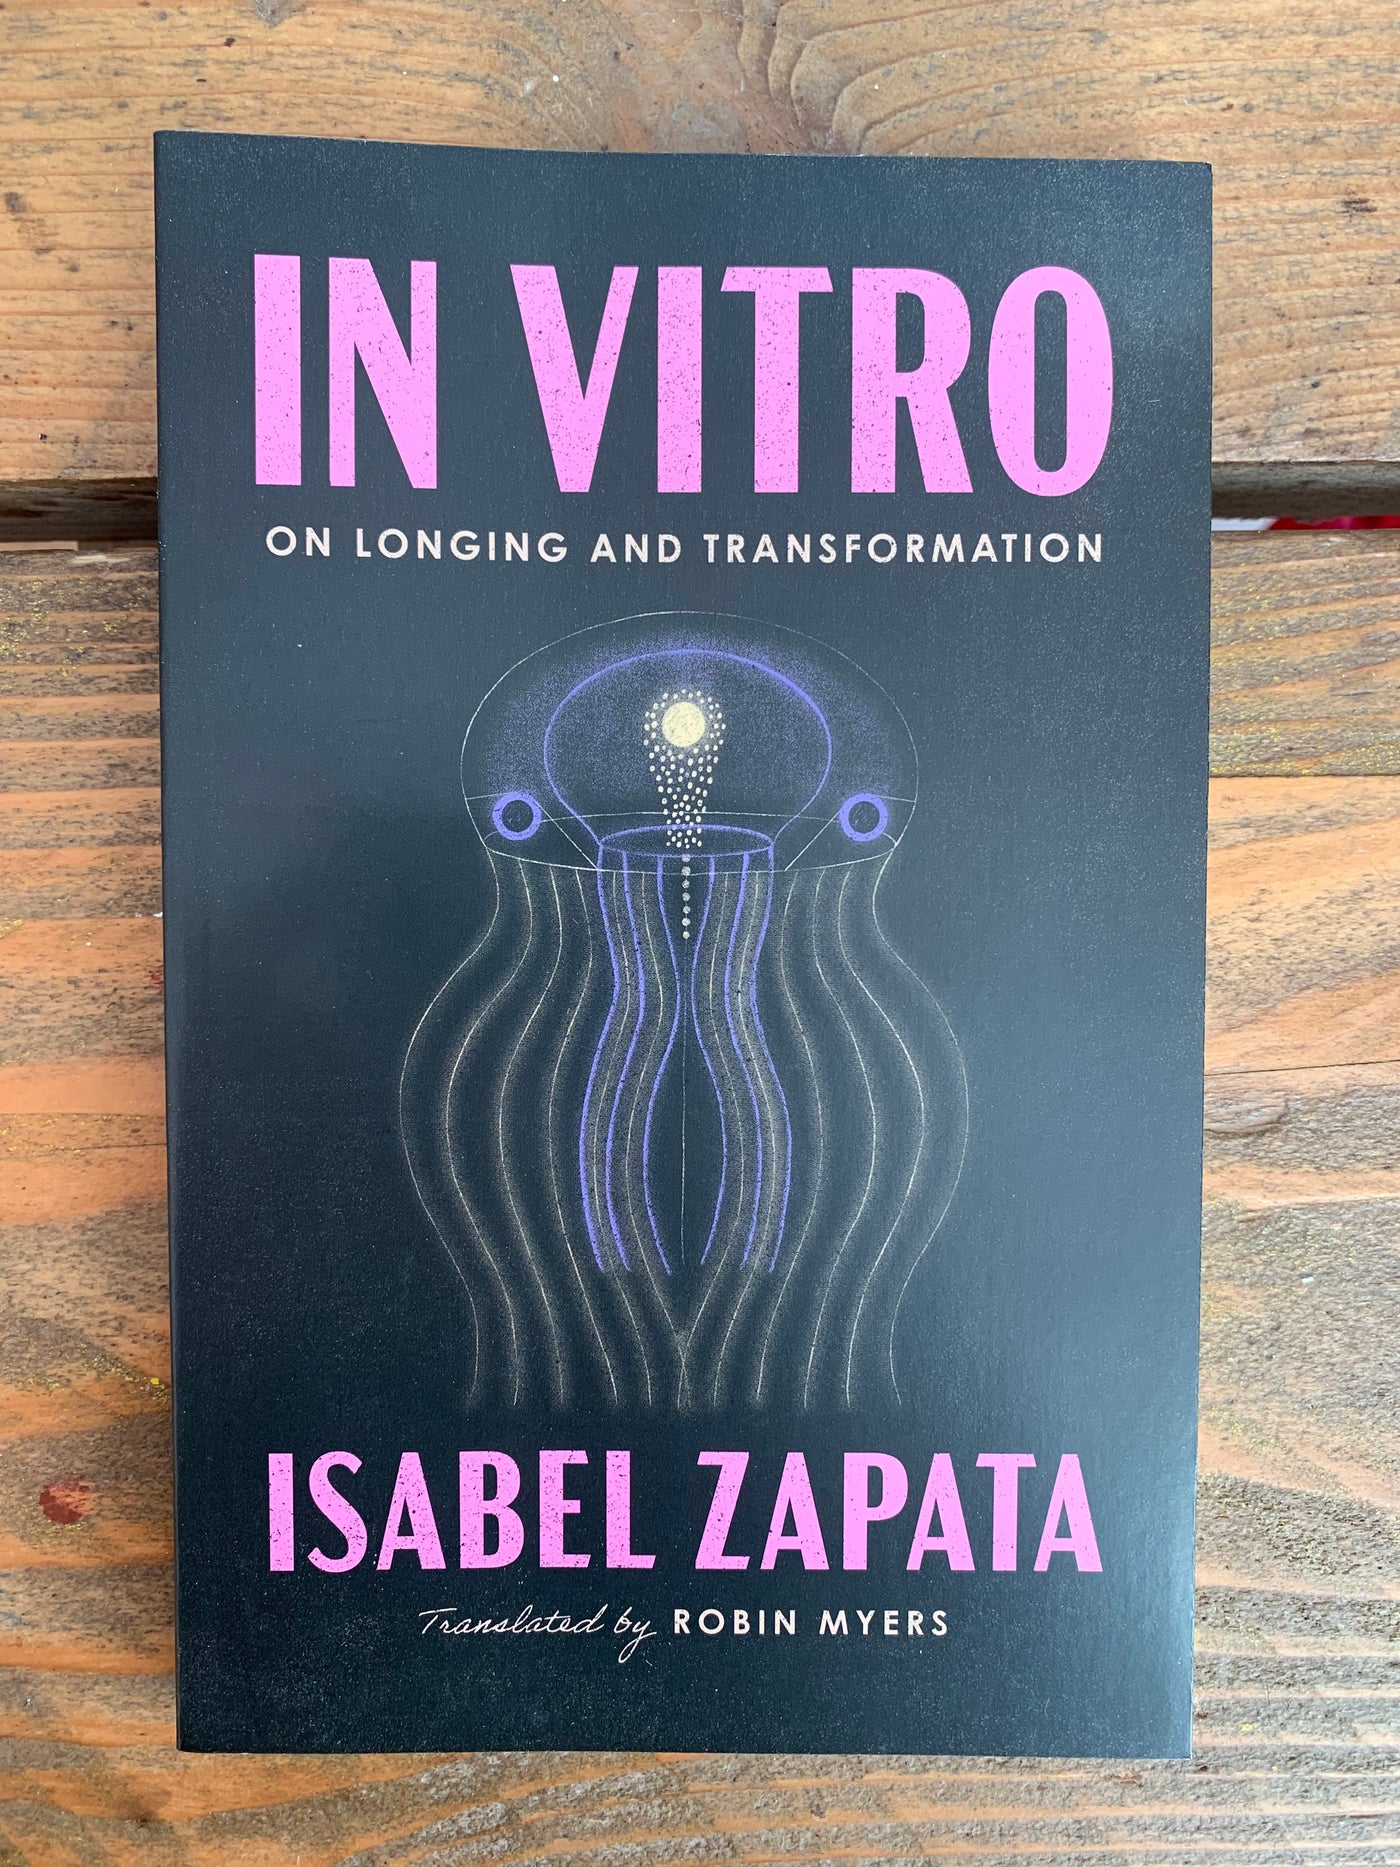 In Vitro: On Longing and Transformation